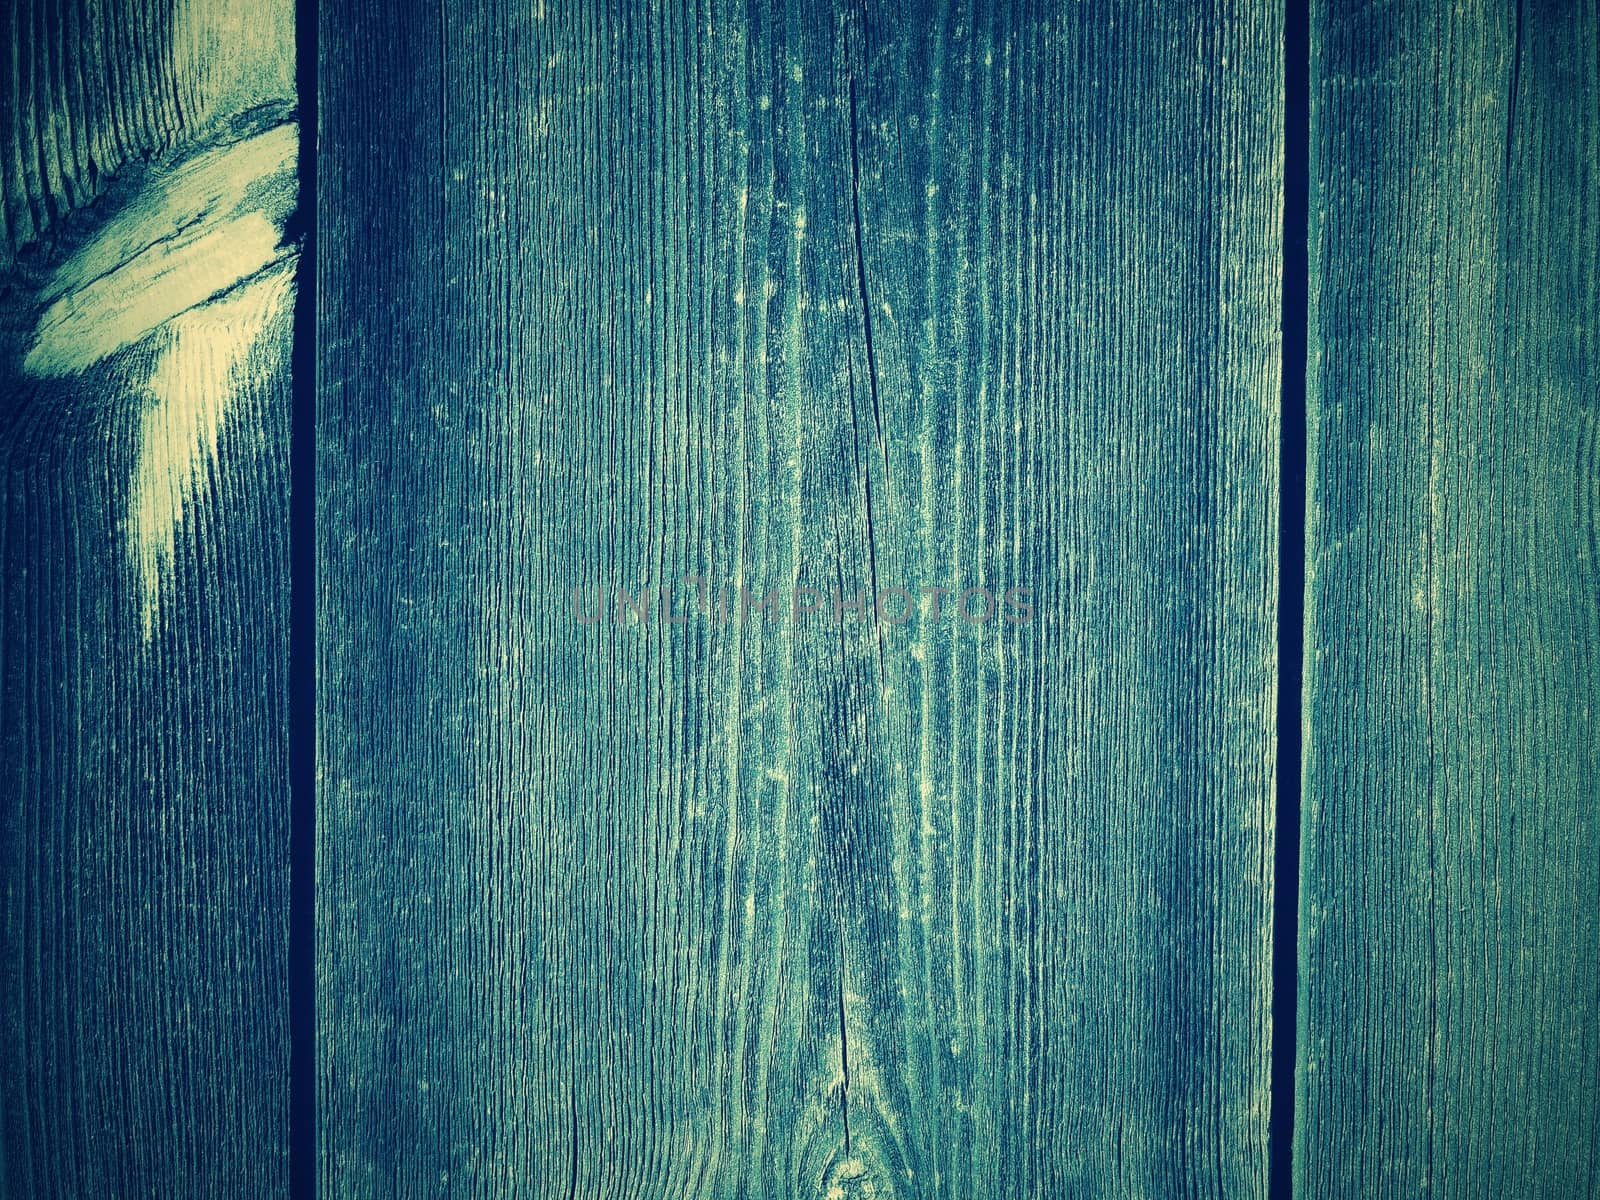 Wooden background from boards of knotty wood. Old boards.